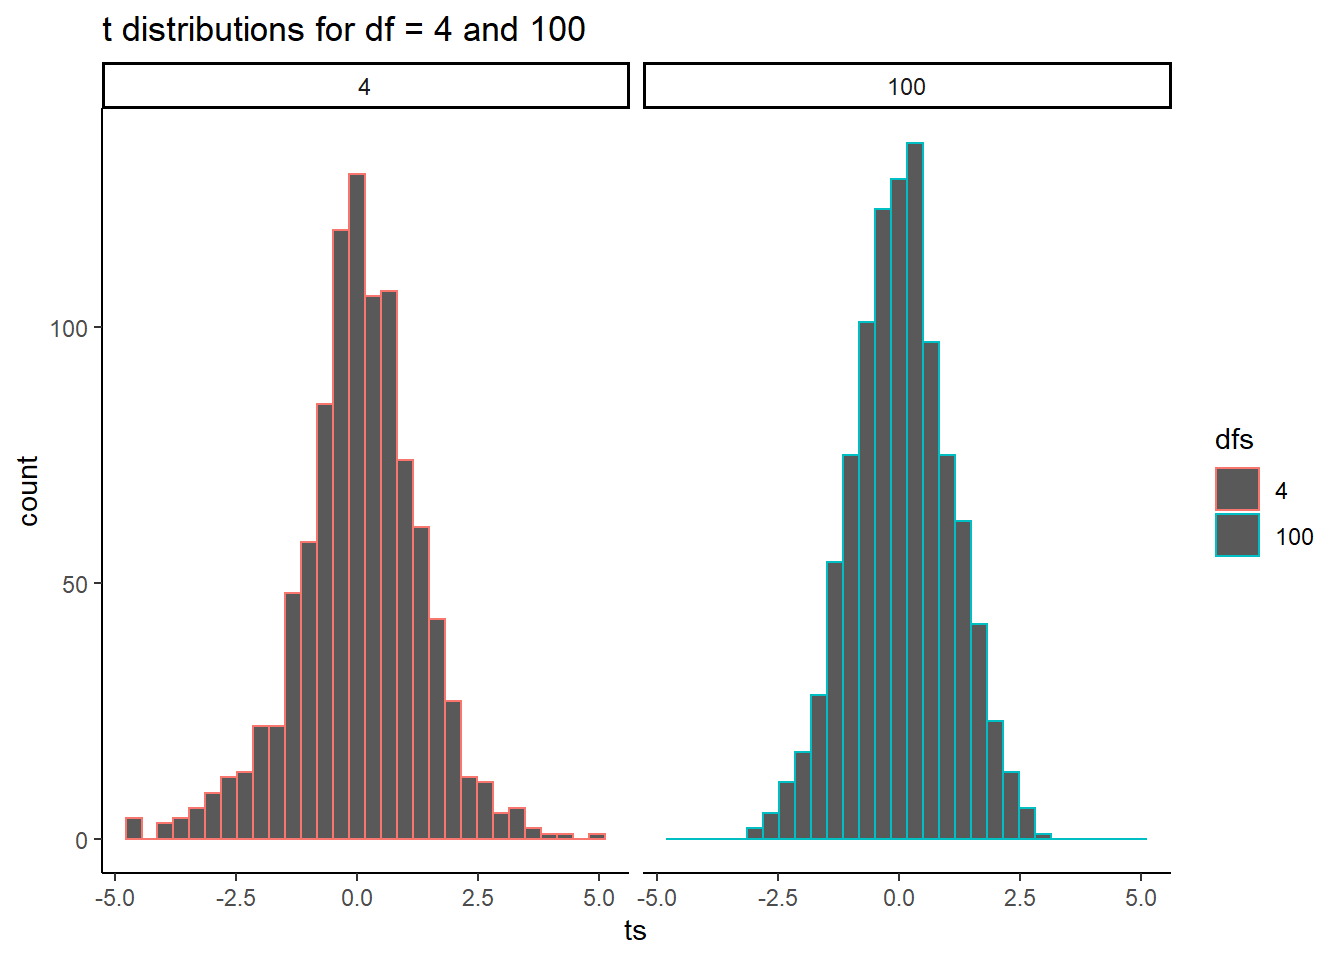 The width of the t distribution shrinks as sample size increases